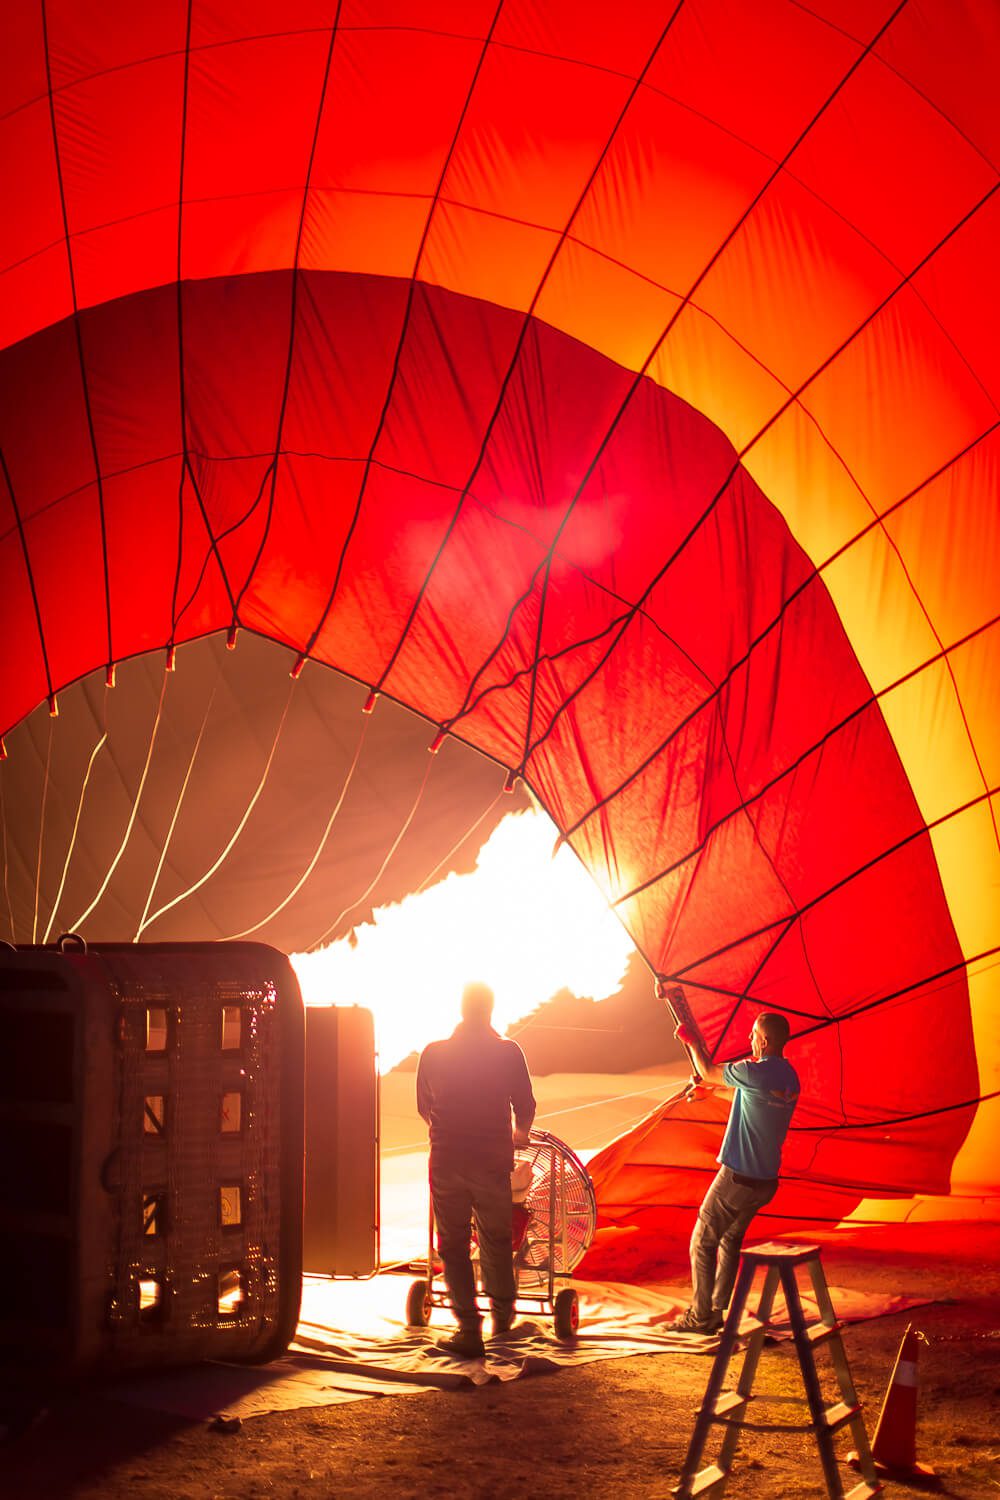 Blowing up the hot air balloon